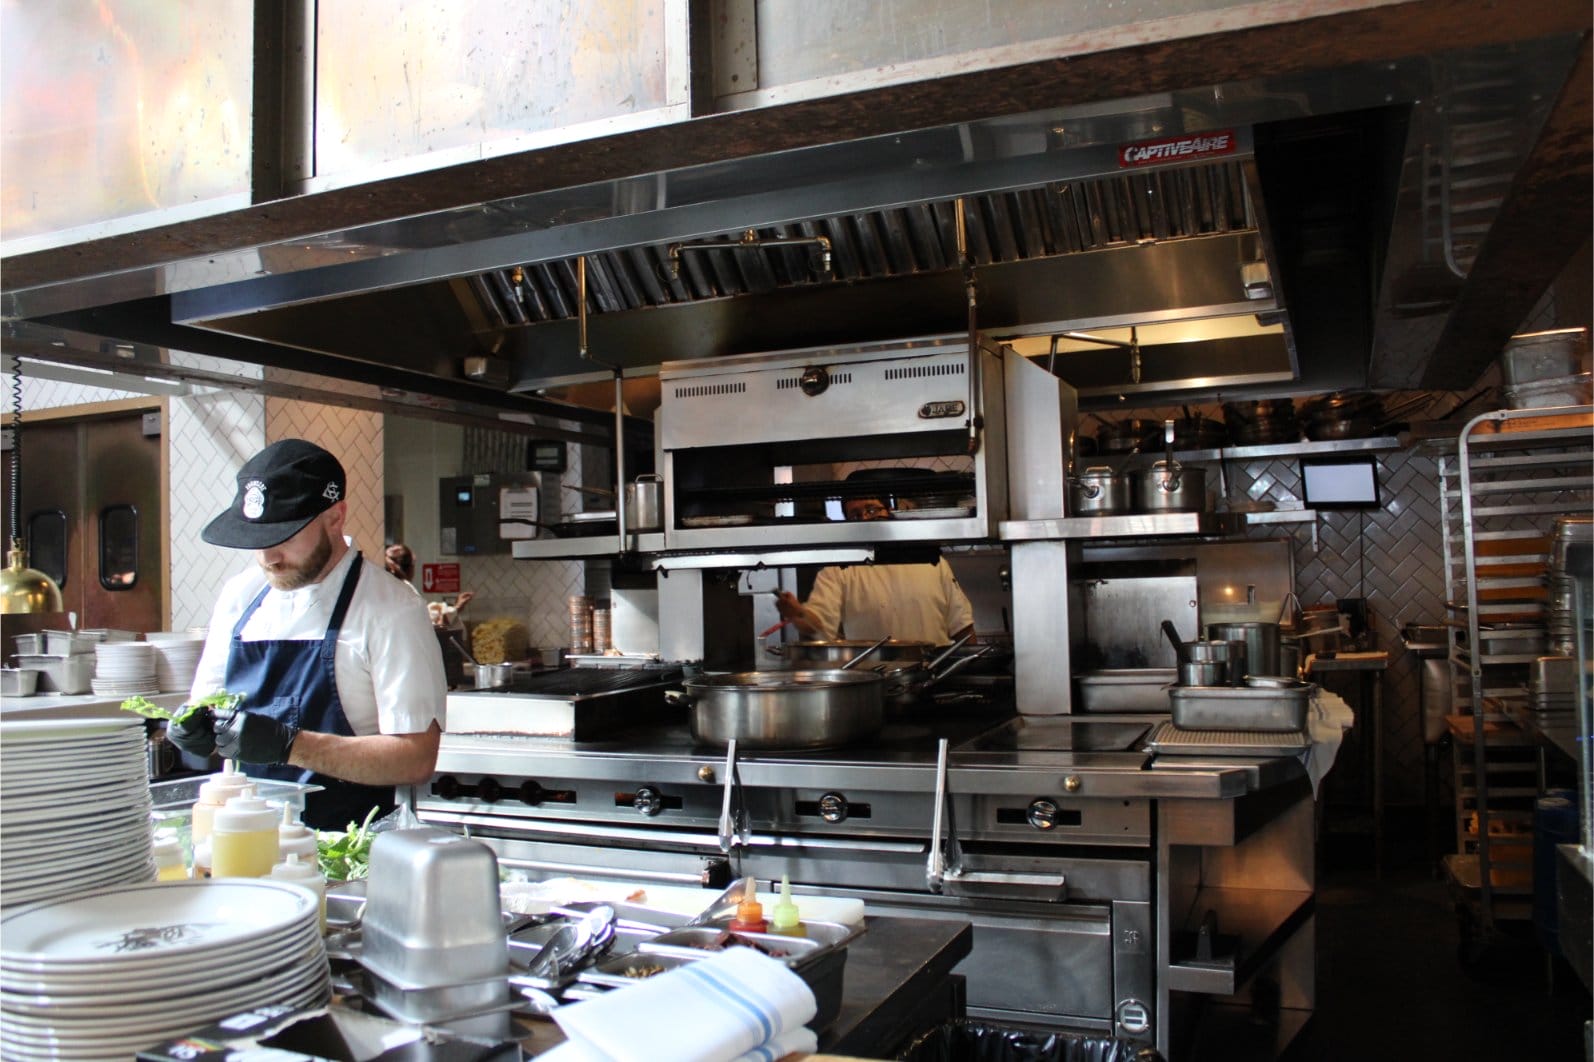 image of a kitchen showing the stainless steel vent system with a chef on the left